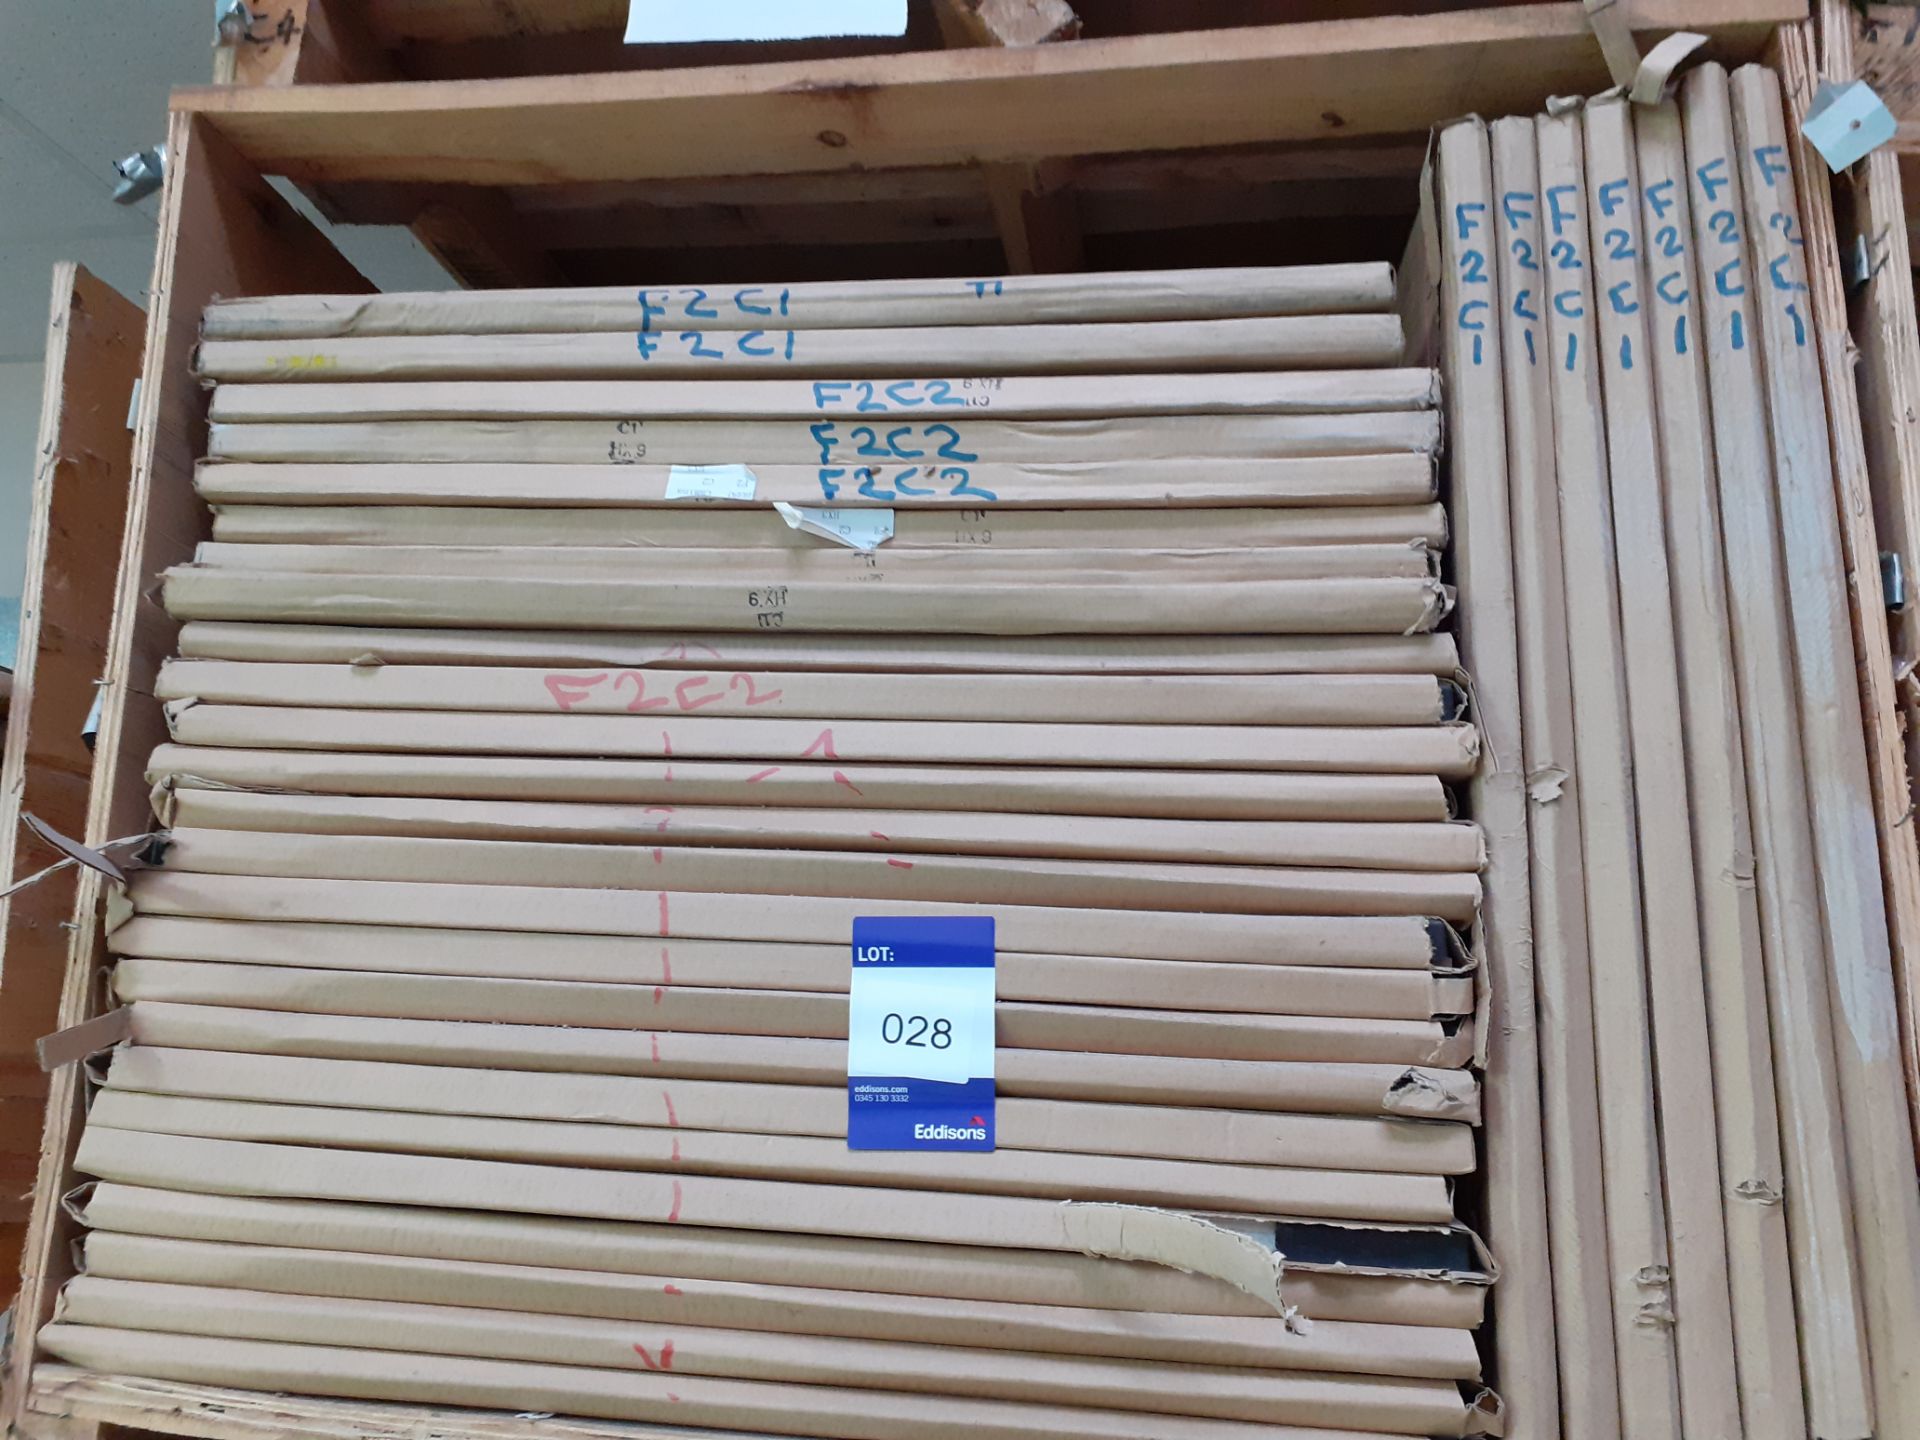 25 boxes x 3 of F2C2 Tiles 600x1200x4.8mm, 7 boxes x 3 of F2C1 Tiles 600x1200x4.8mm & 9 boxes x 3 of